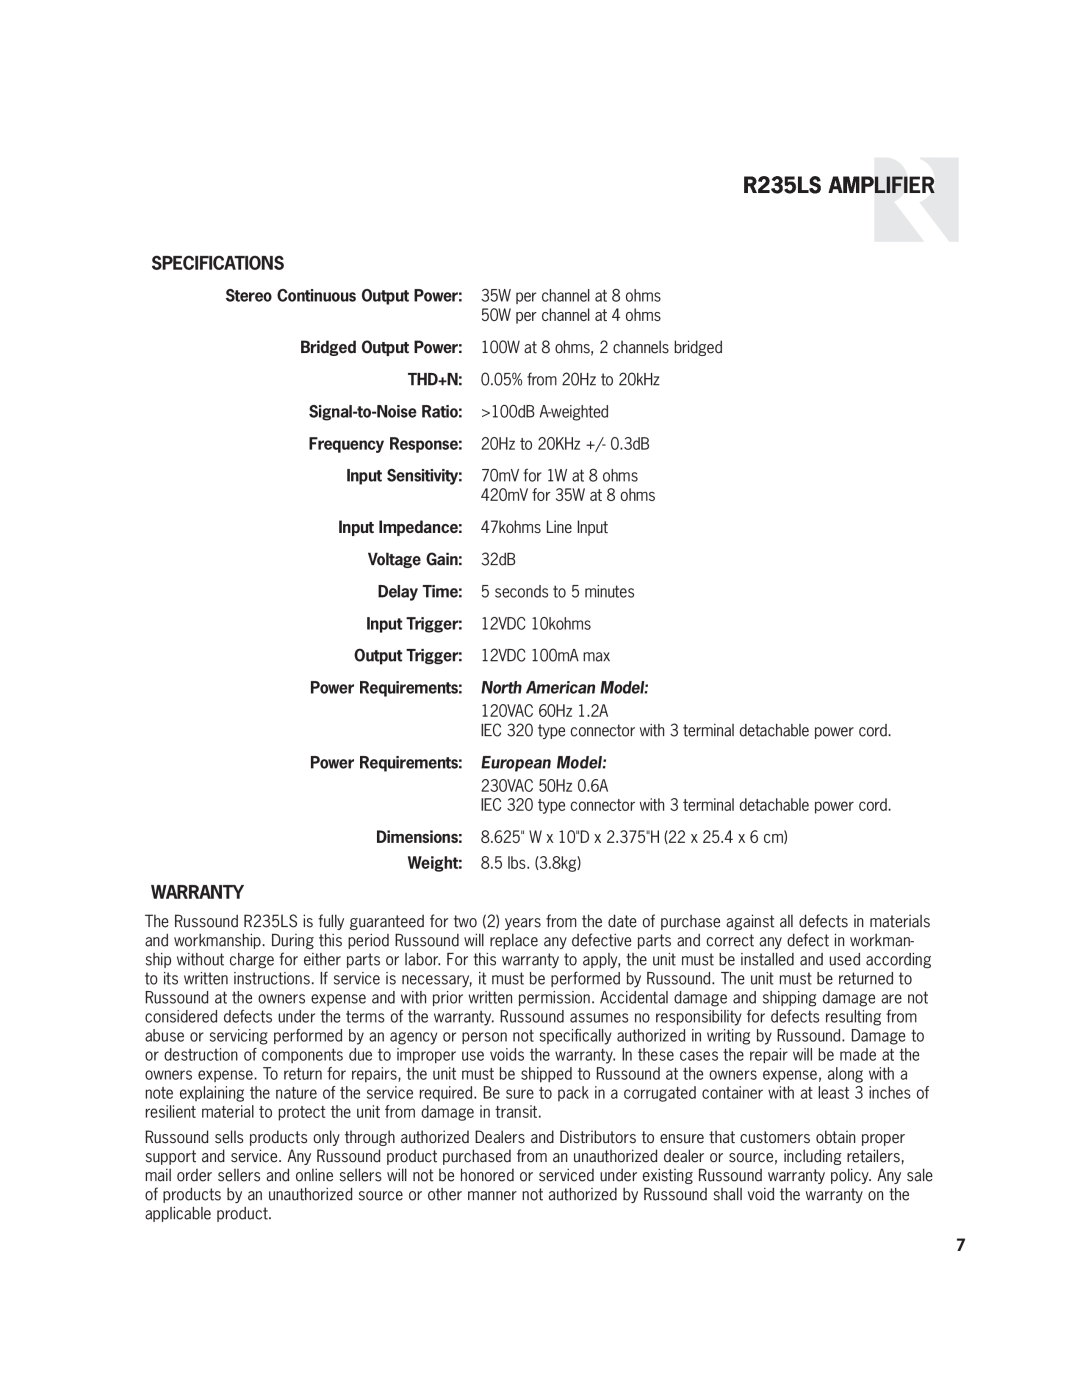 Russound R-Series user manual Specifications, R235LS AMPLIFIER, North American Model, European Model 